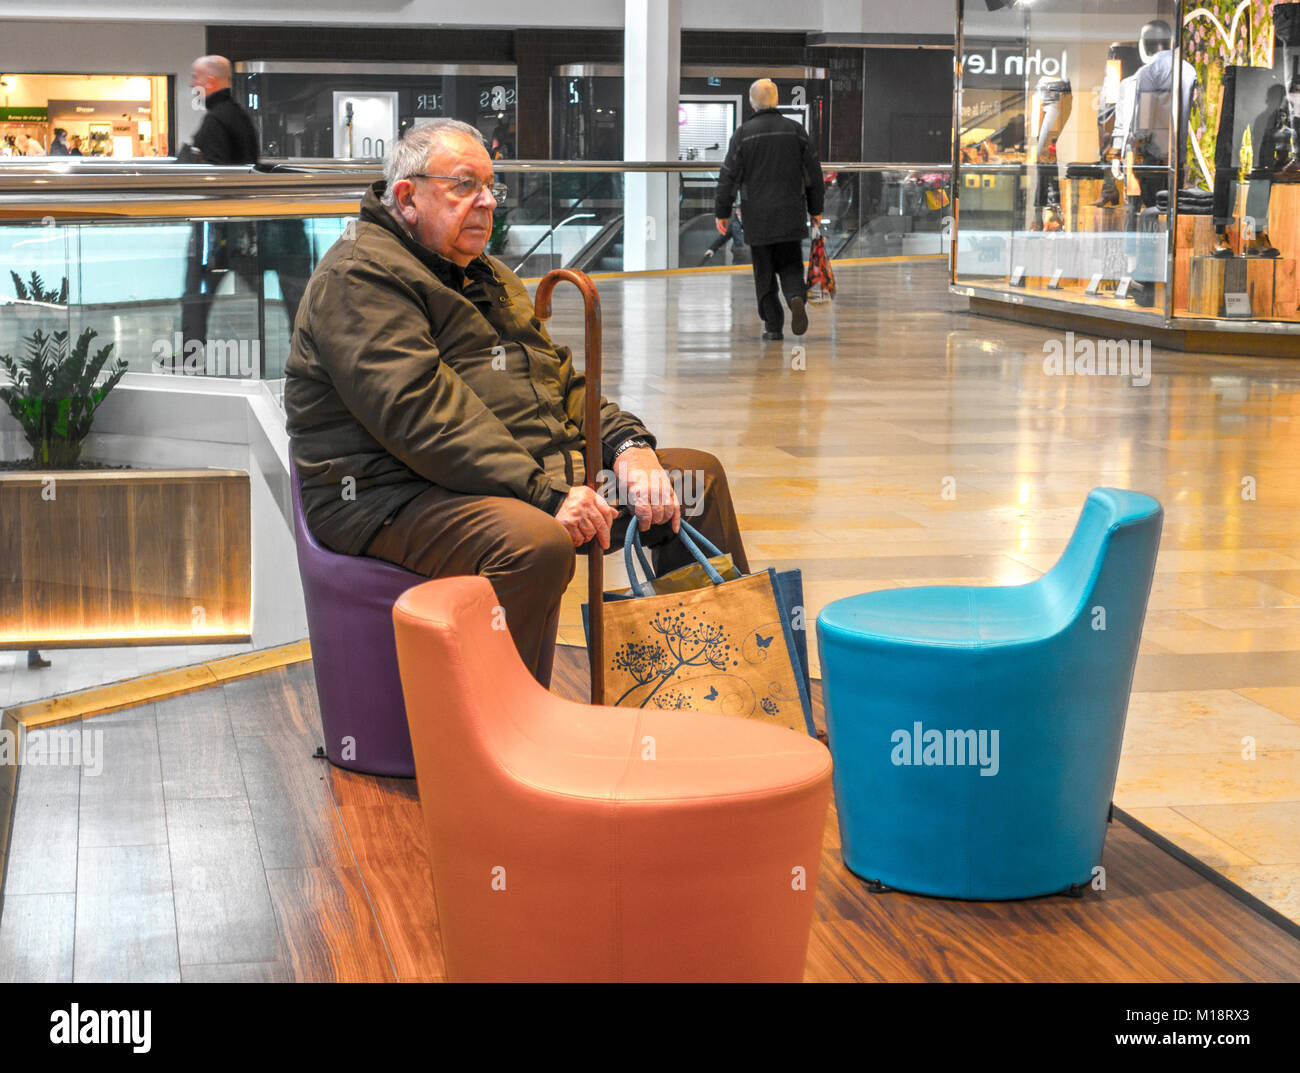 Old man sitting down, holding a walking stick and some carrier bags in the Queensgate shopping centre, Peterborough city, Cambridgeshire, England, UK. Stock Photo